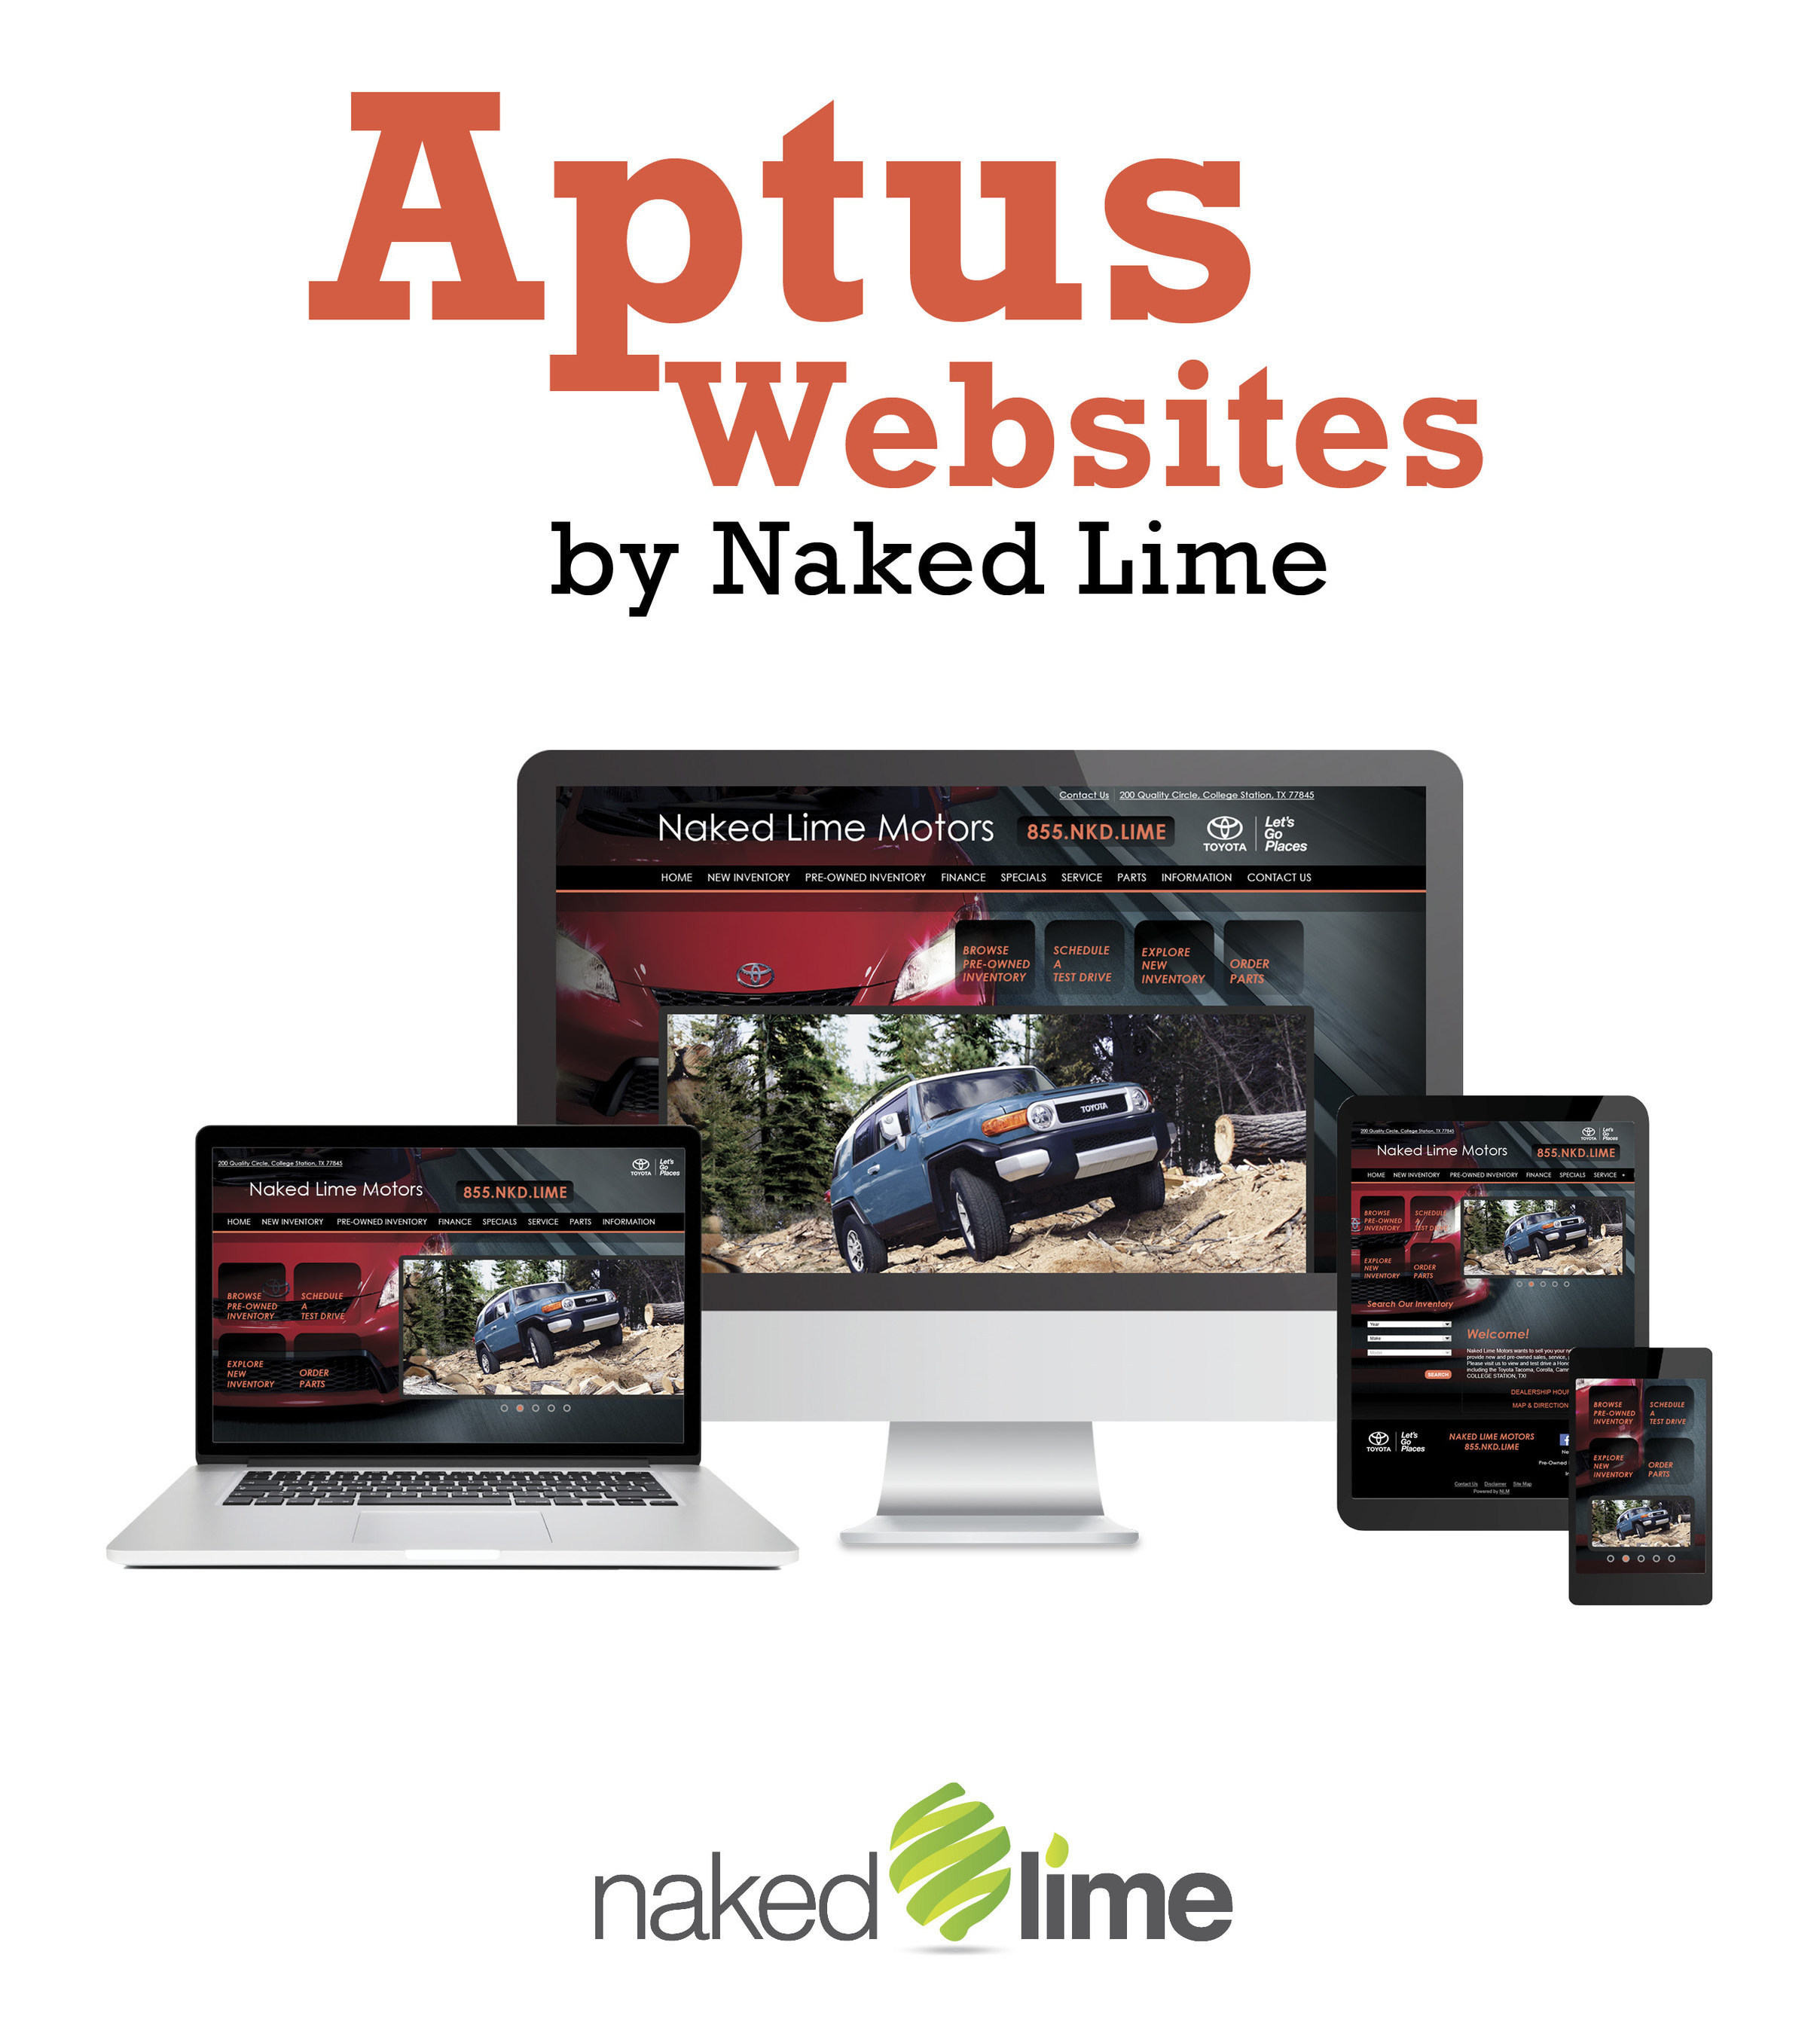 New Aptus Websites from Naked Lime Marketing: An unparalleled mix of flexibility and service for dealers and their customers.